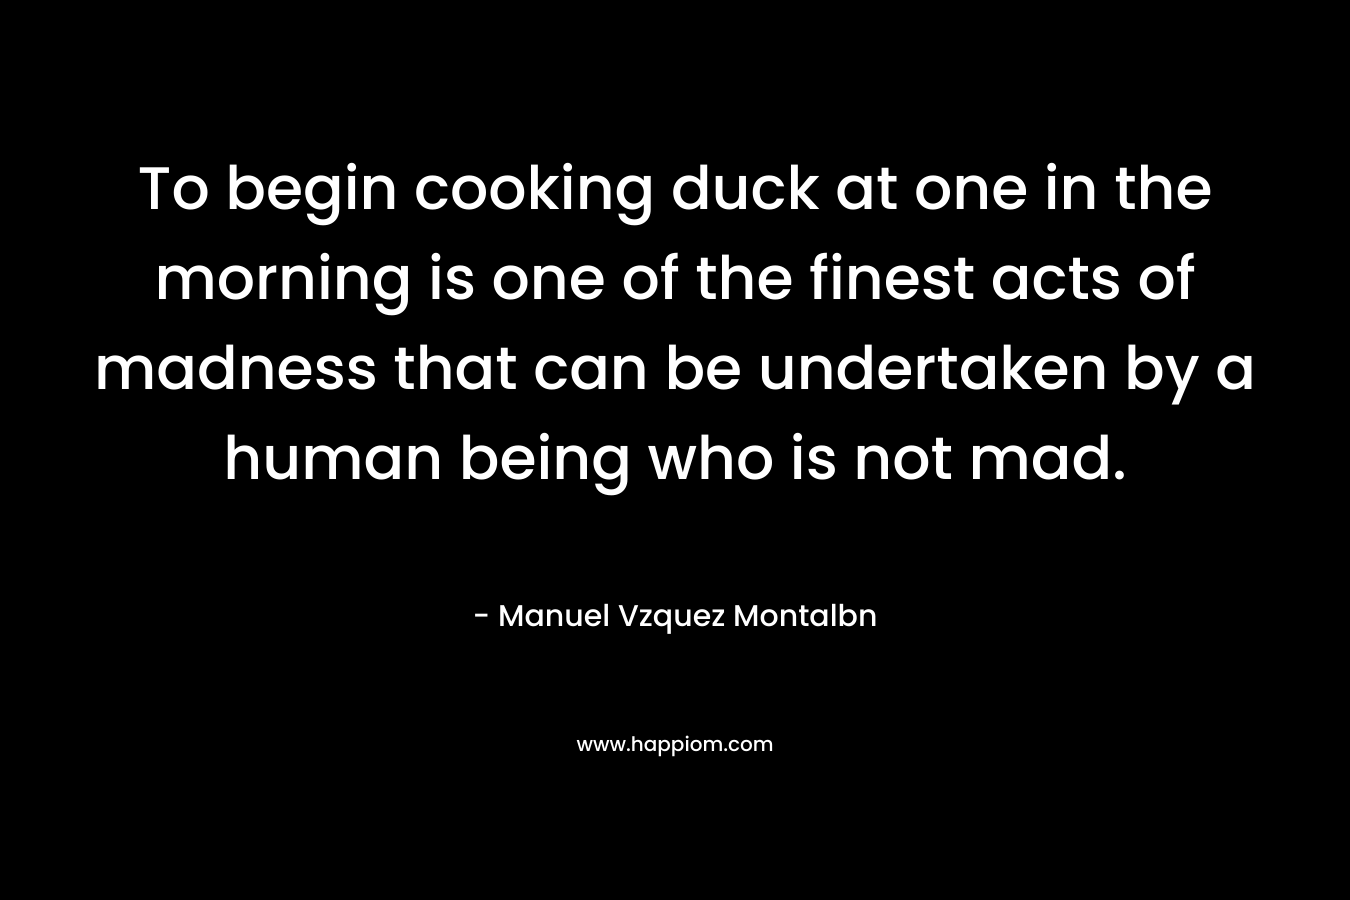 To begin cooking duck at one in the morning is one of the finest acts of madness that can be undertaken by a human being who is not mad. – Manuel Vzquez Montalbn